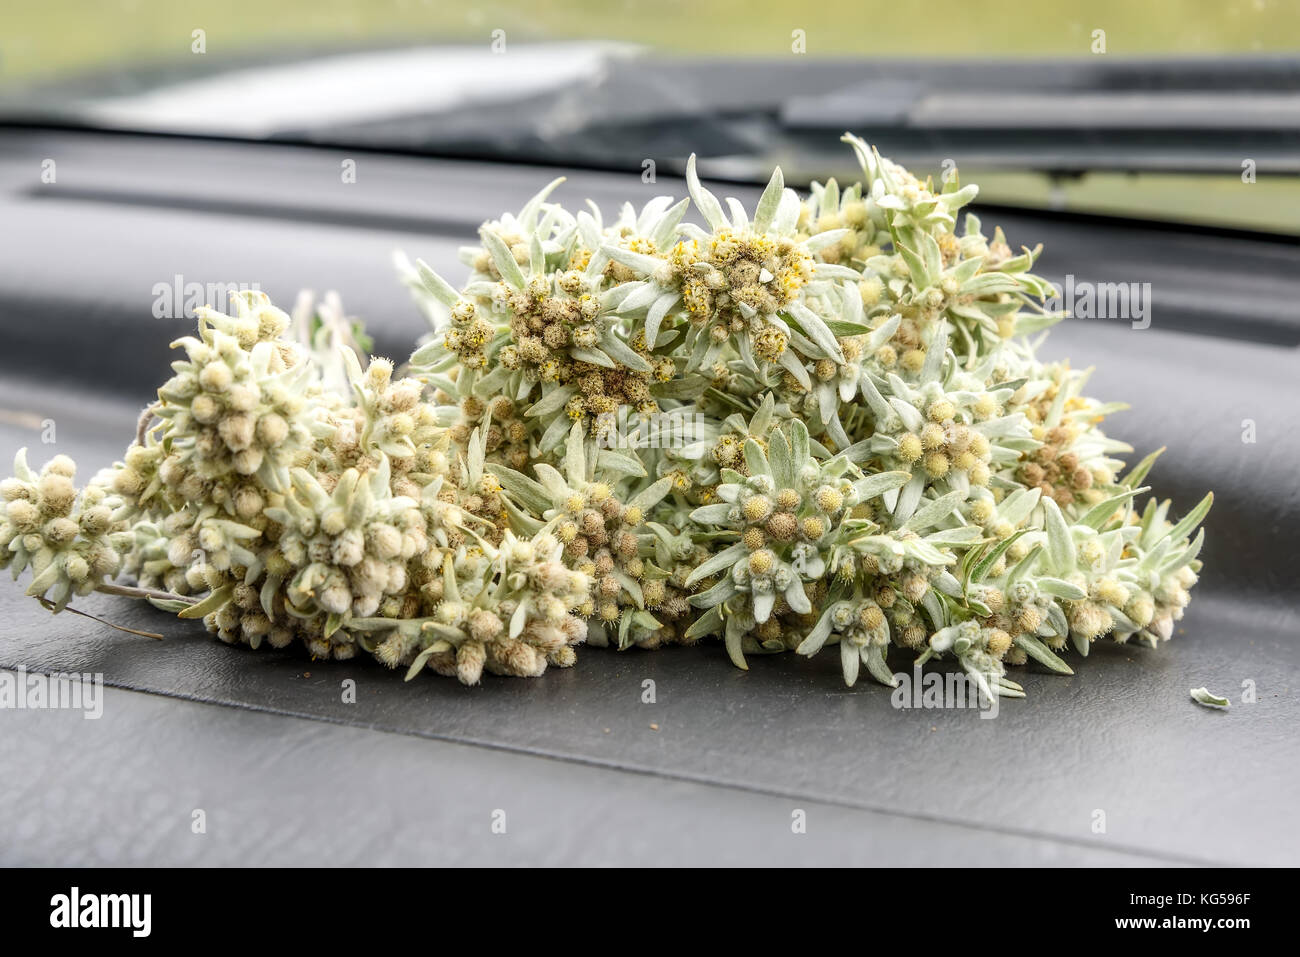 A beautiful bouquet of delicate fluffy edelweiss flowers lies on the car's panel in front of the windshield Stock Photo